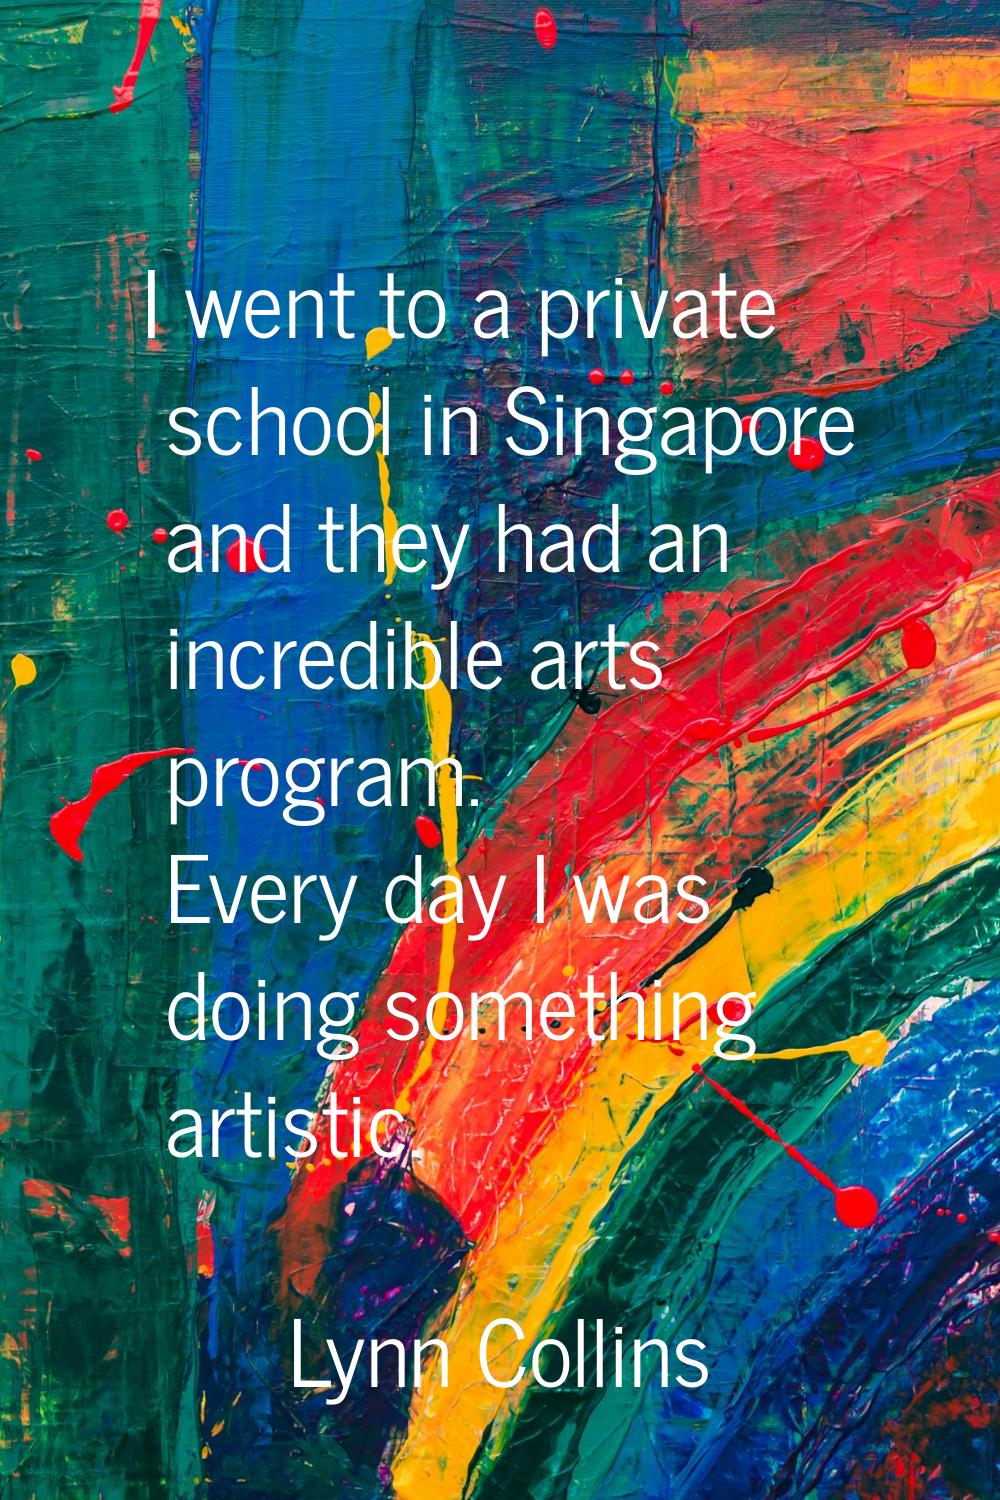 I went to a private school in Singapore and they had an incredible arts program. Every day I was do